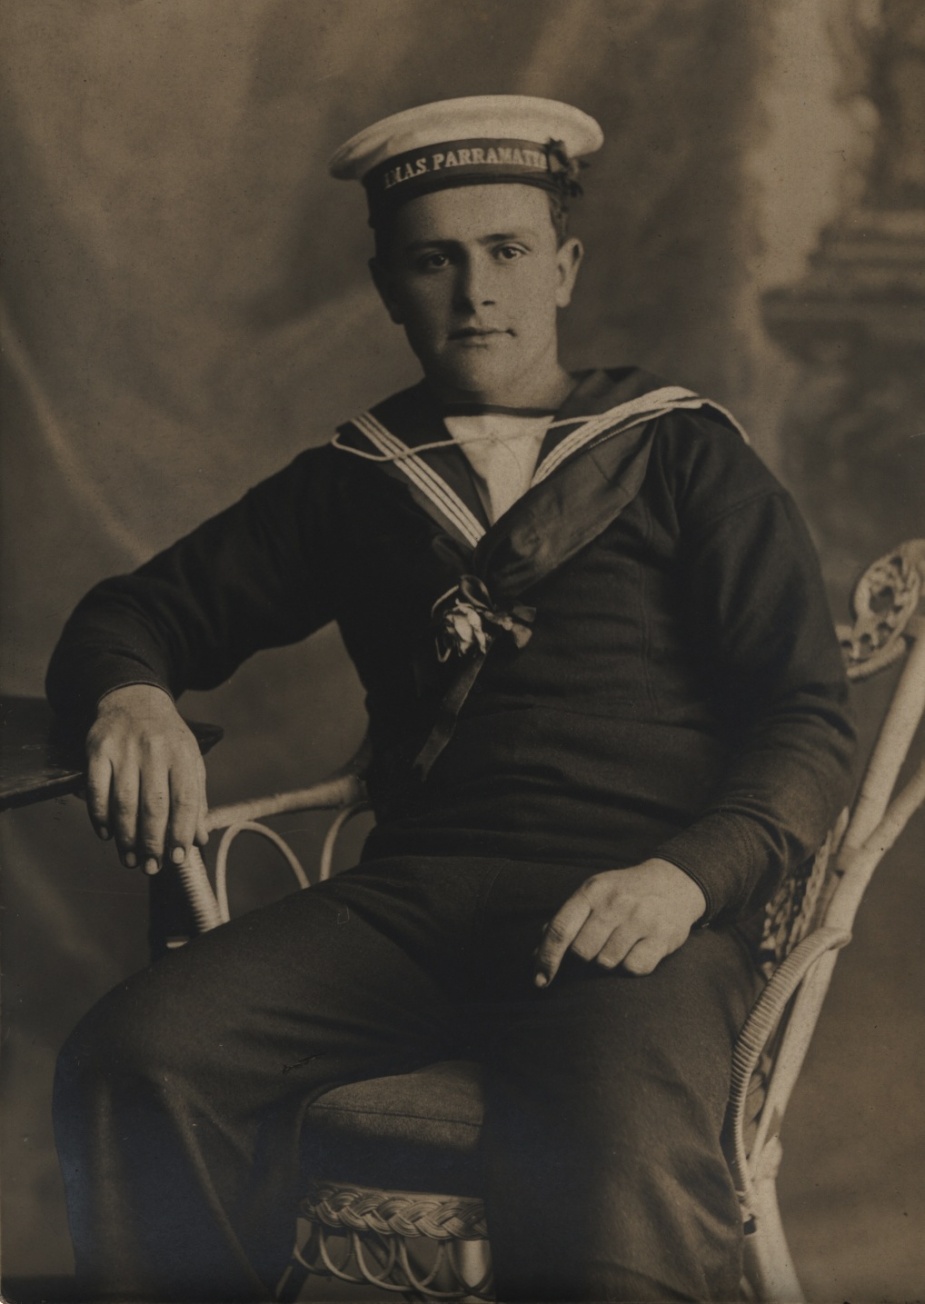 A seaman of HMAS Parramatta poses proudly in his uniform with cap ribbon clearly visible.